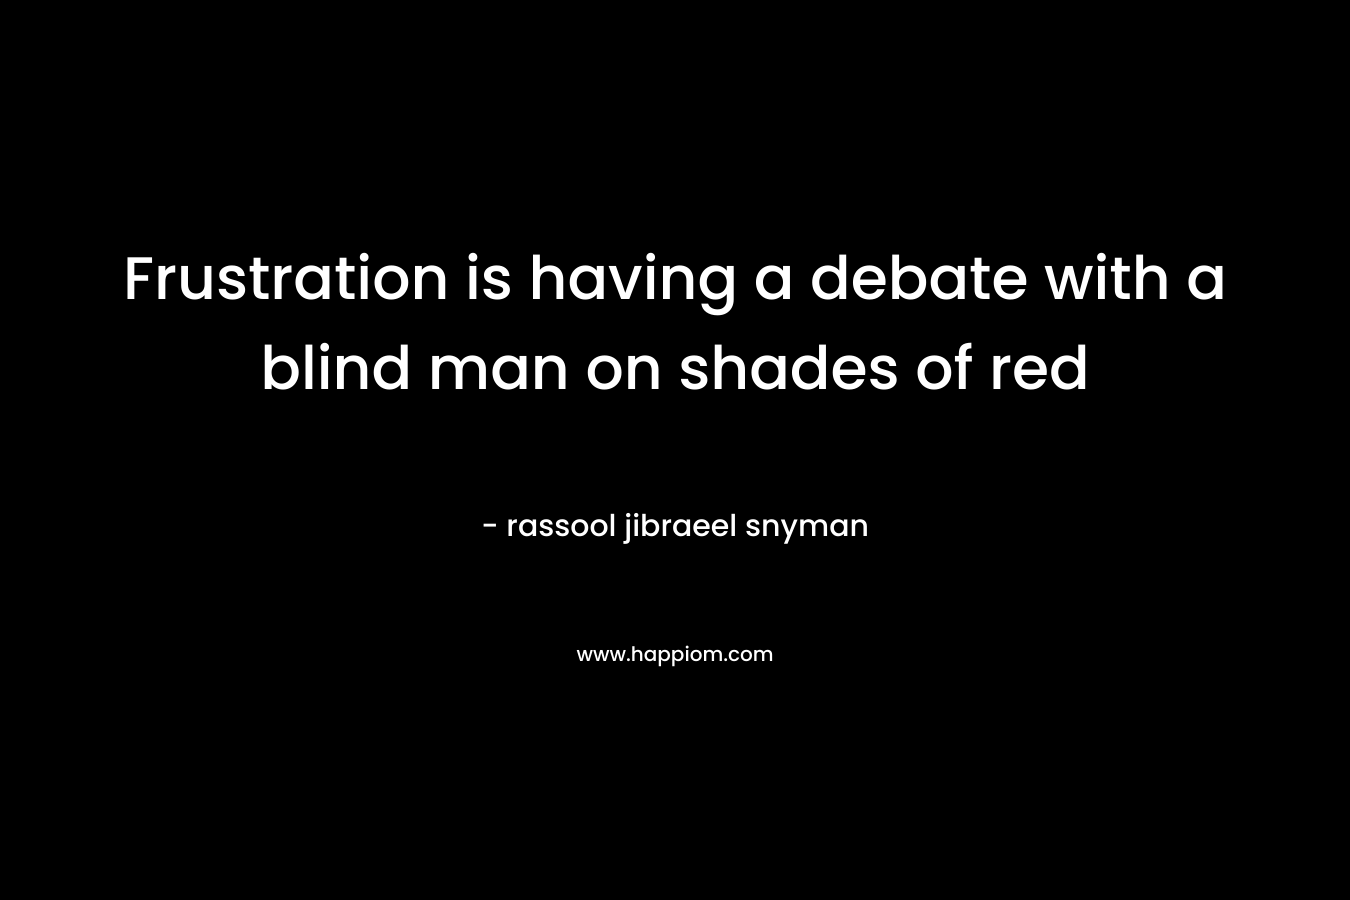 Frustration is having a debate with a blind man on shades of red